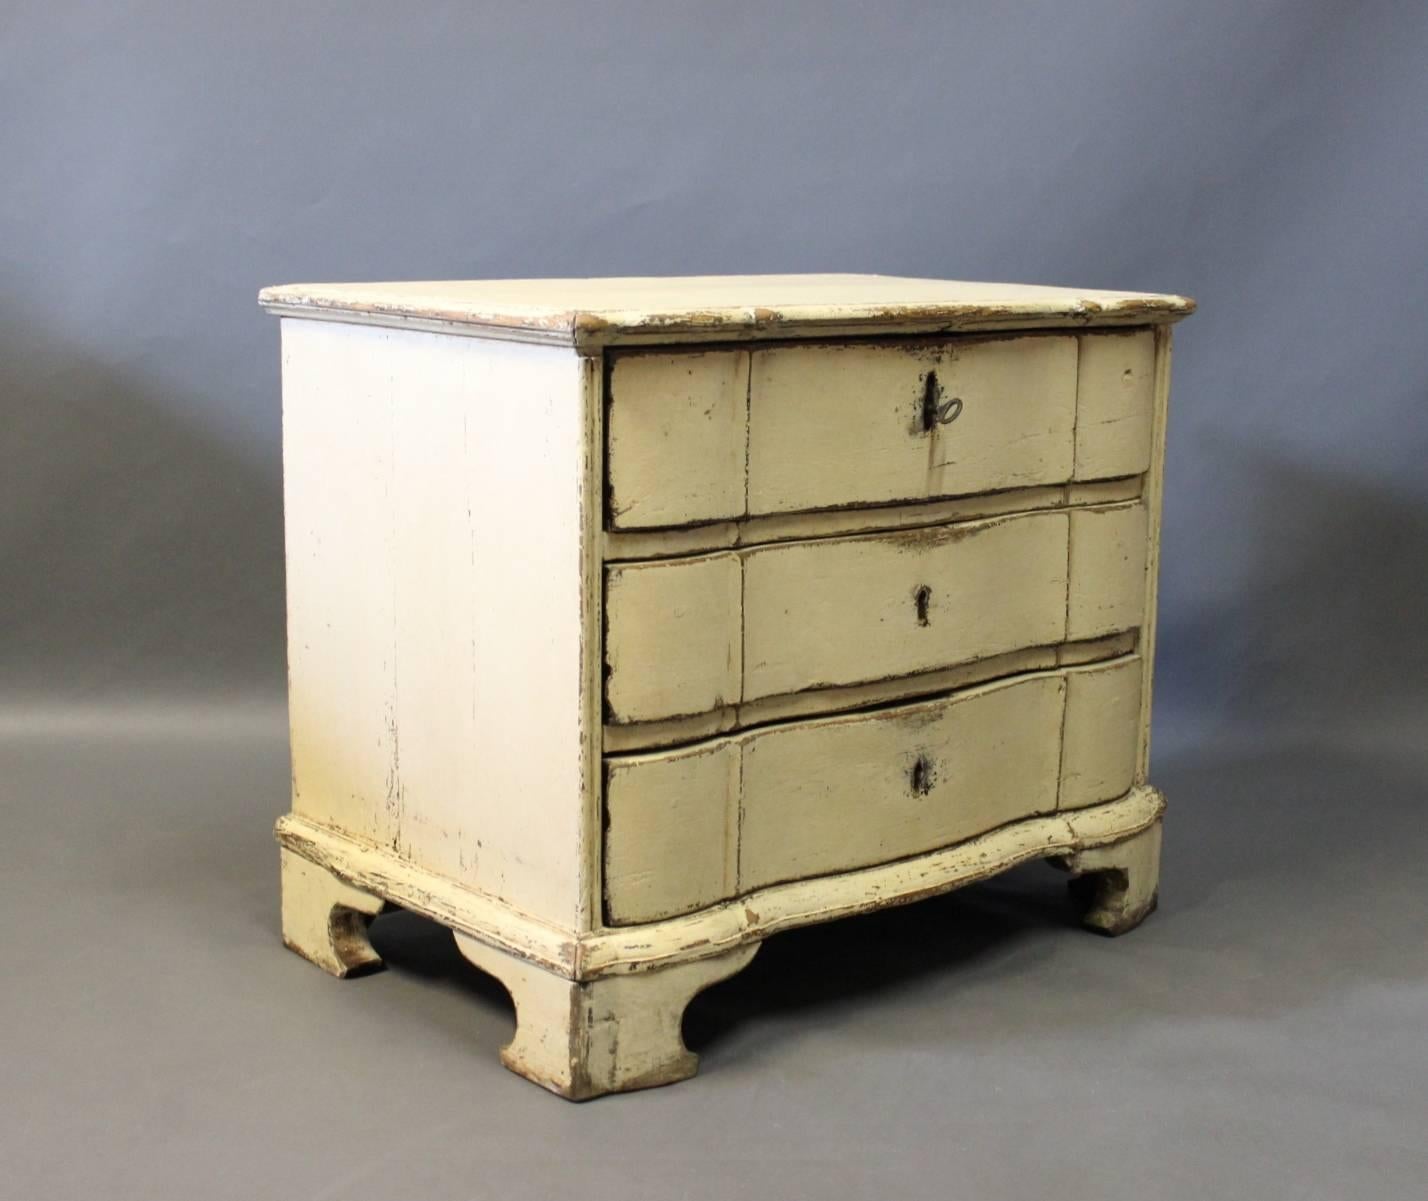 Small Danish Baroque chest of drawers of painted wood from the 1760s. The chest is in great vintage condition.